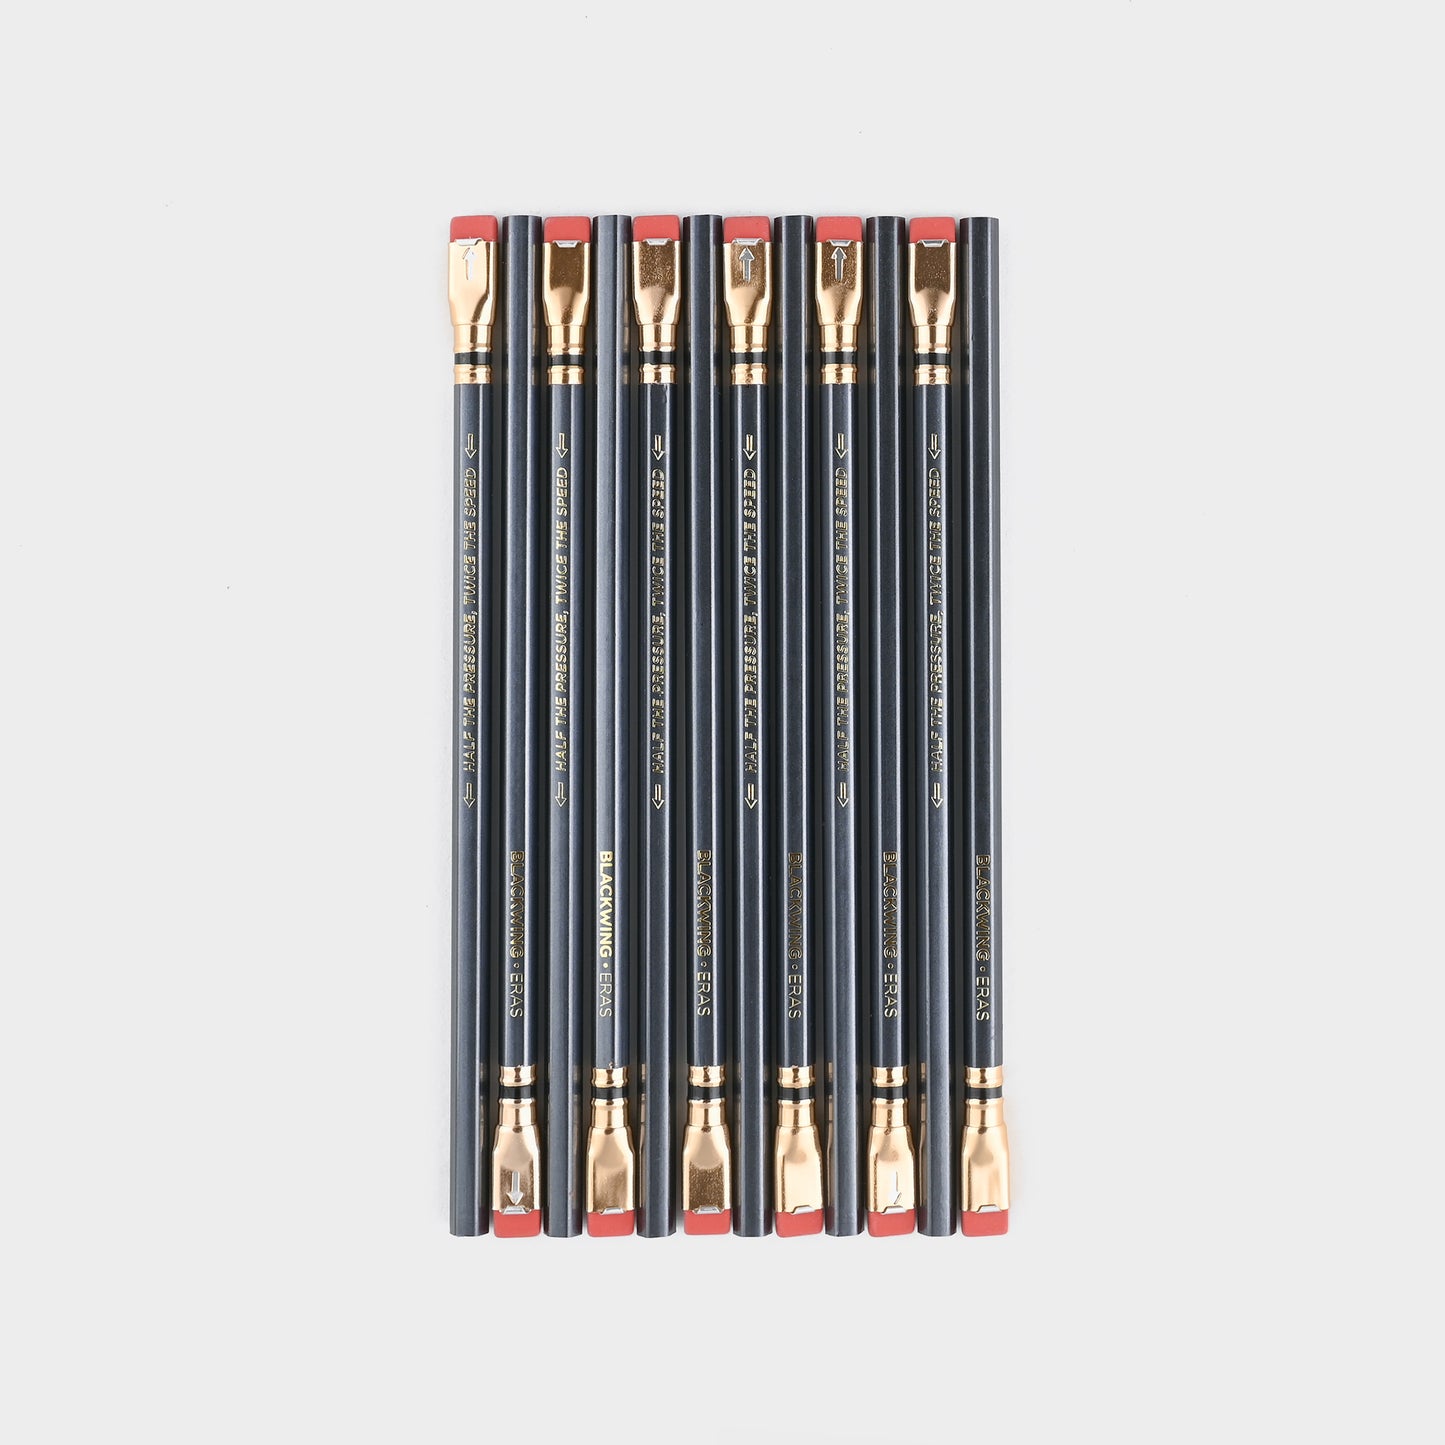 Blackwing Blackwing Eras 2022 Limited Edition Pencils Box of 12 